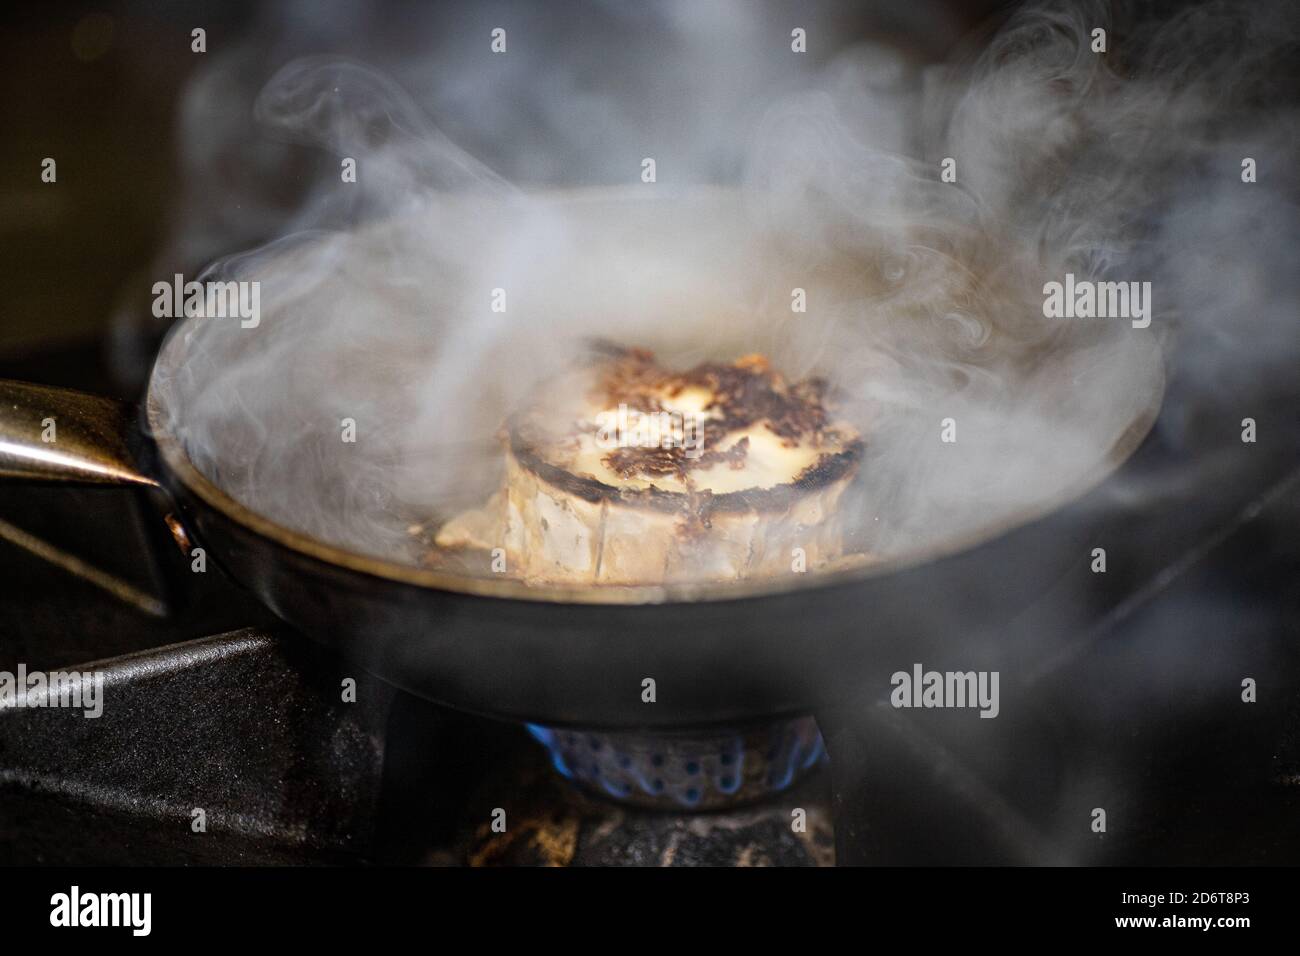 Steaming seared cheese being prepared in iron frying pan on gas stove in restaurant kitchen Stock Photo